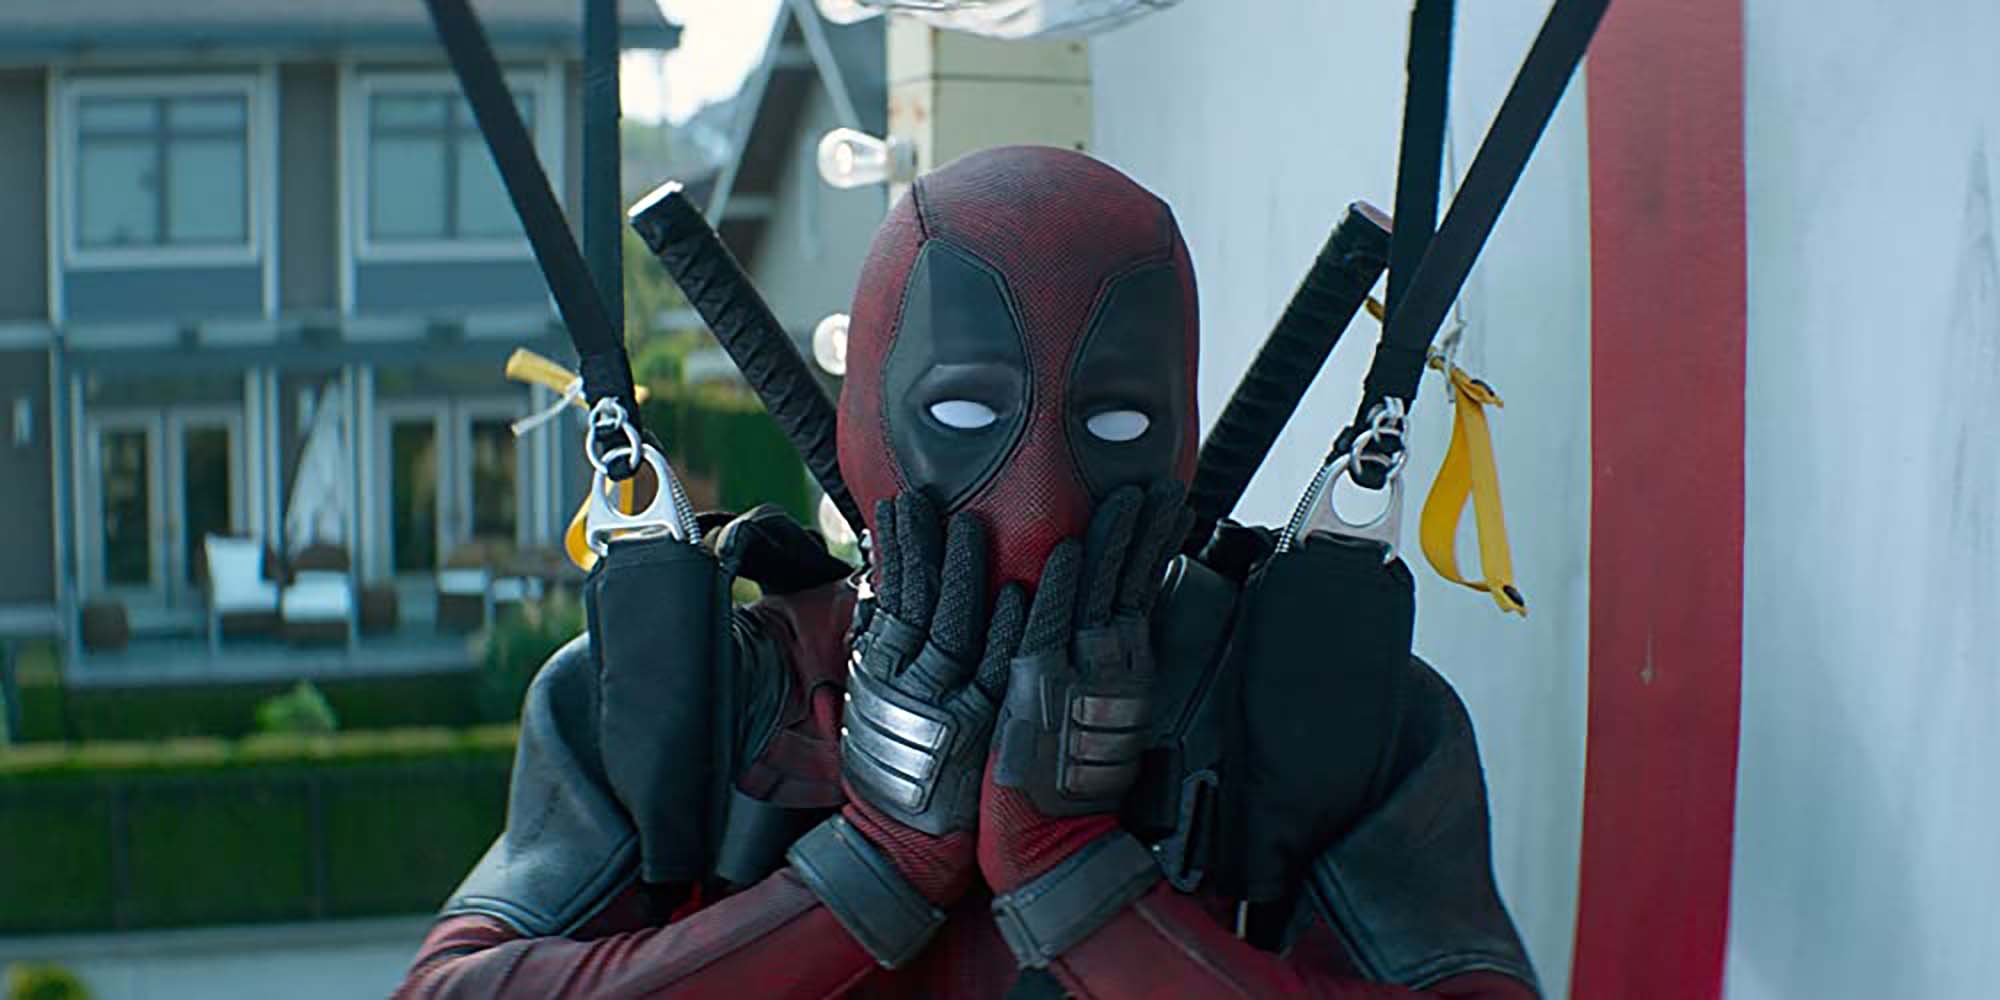 A man in a Deadpool costume with his hands on his face in mock surprise. Deadpool 2 still